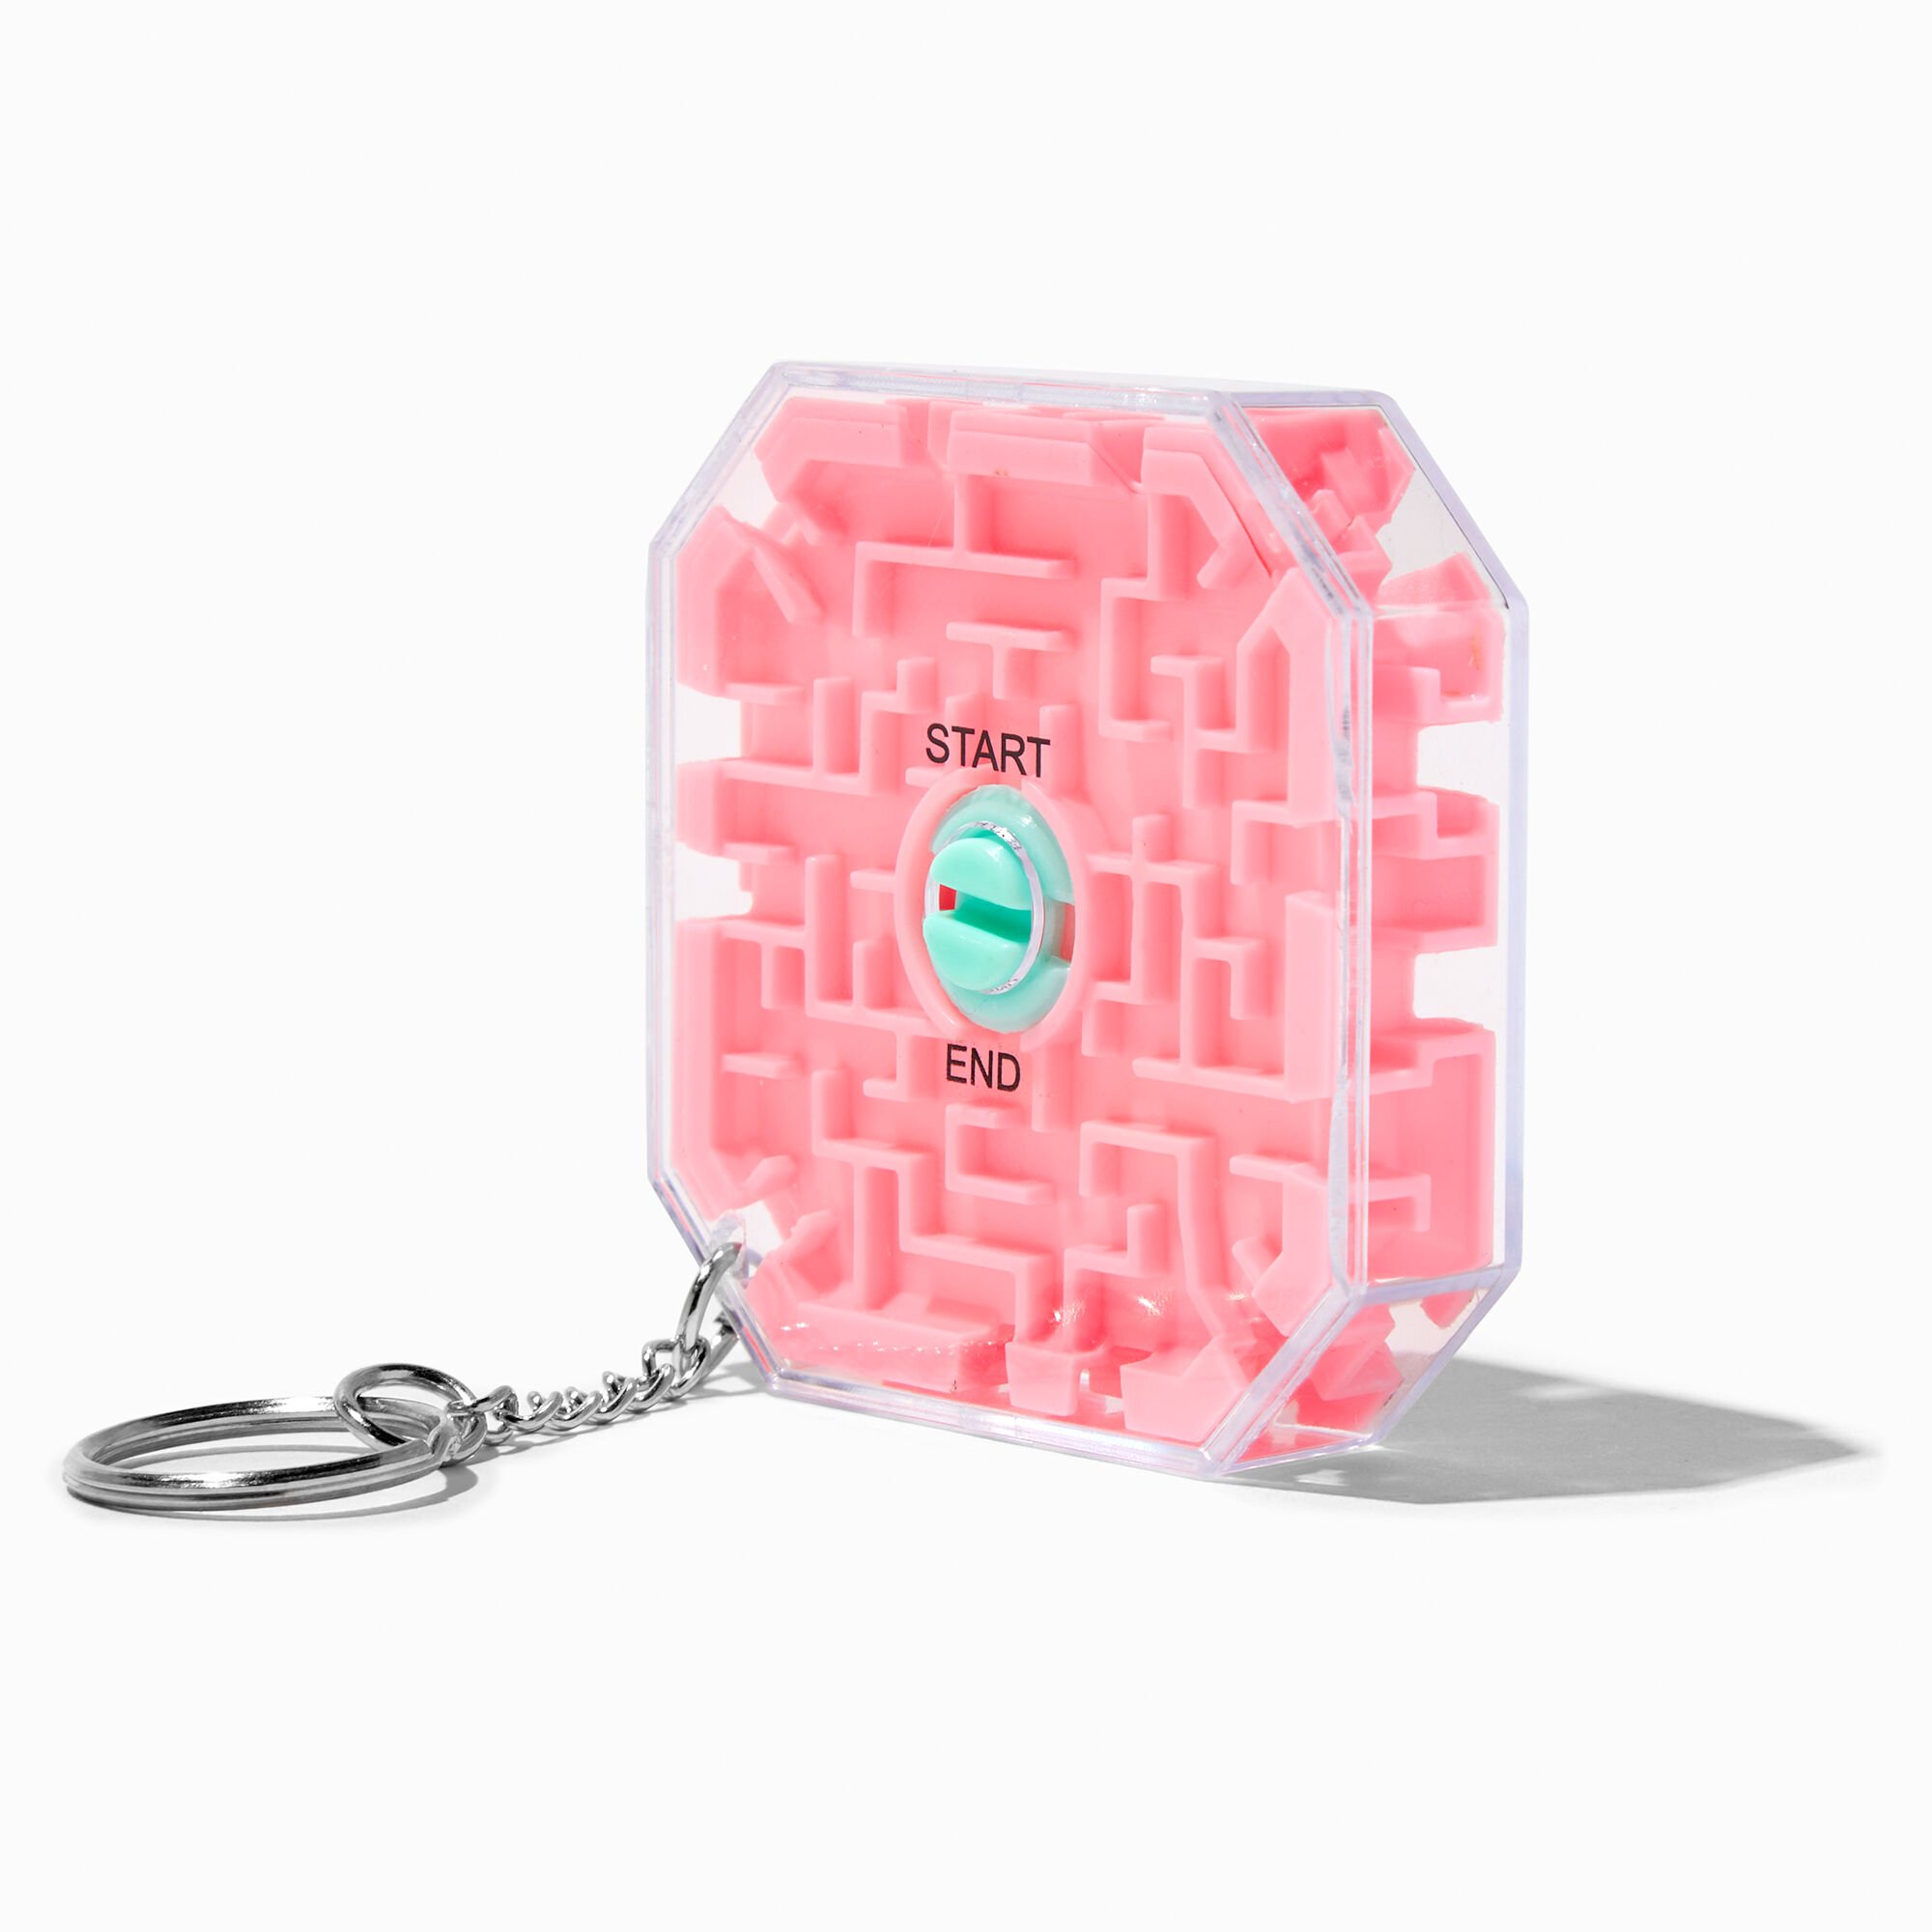 View Claires Maze Game Keychain Pink information